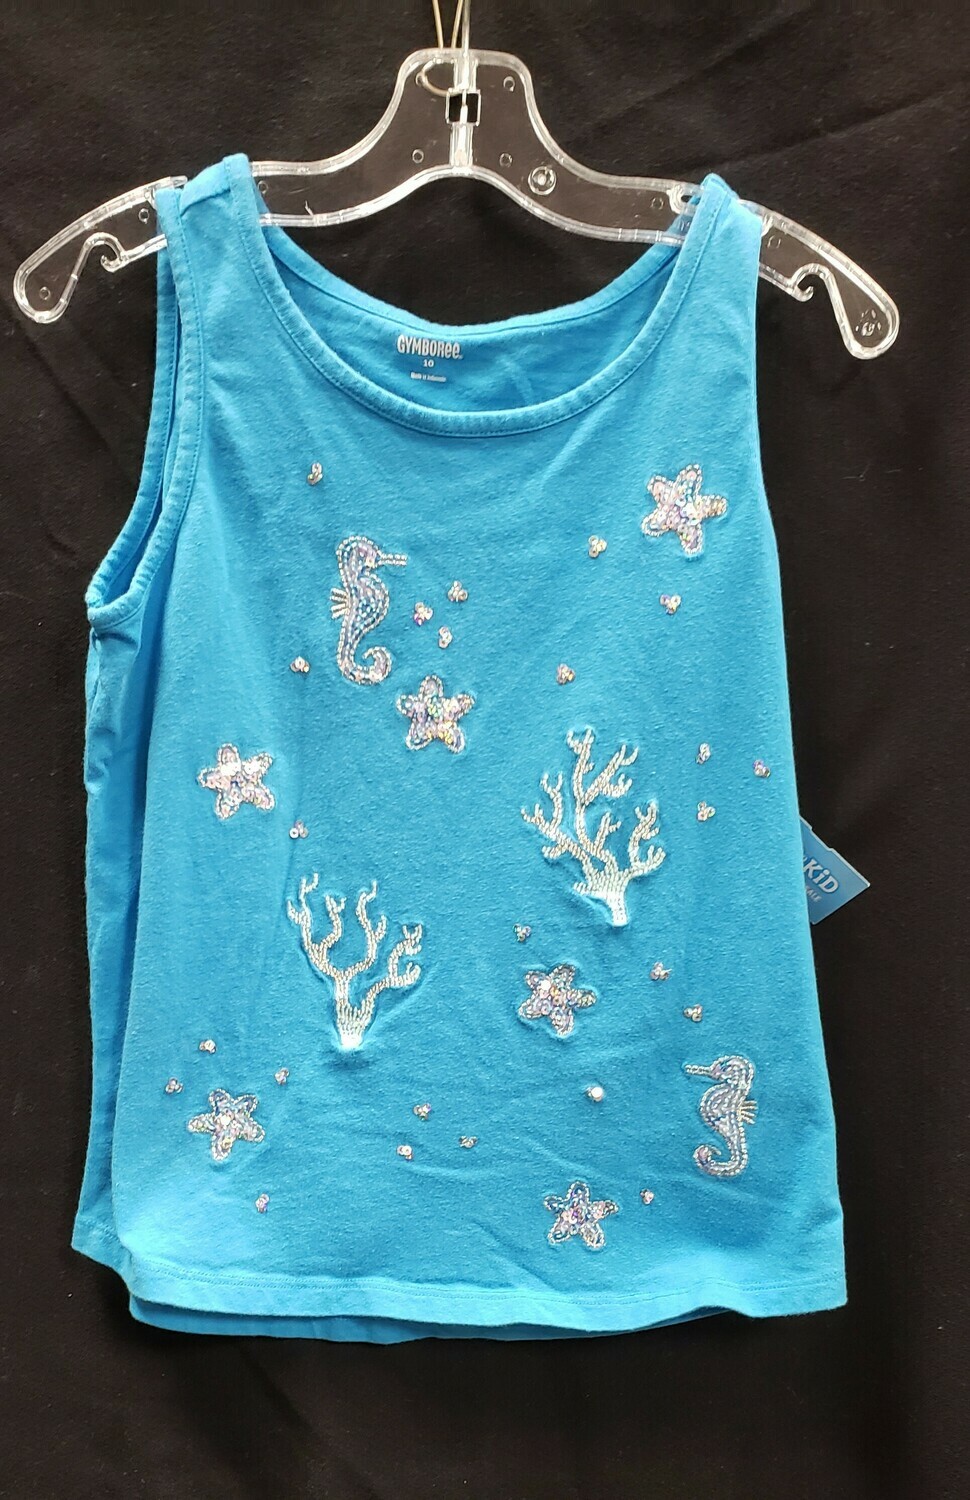 Girls Top Size 10 - Used